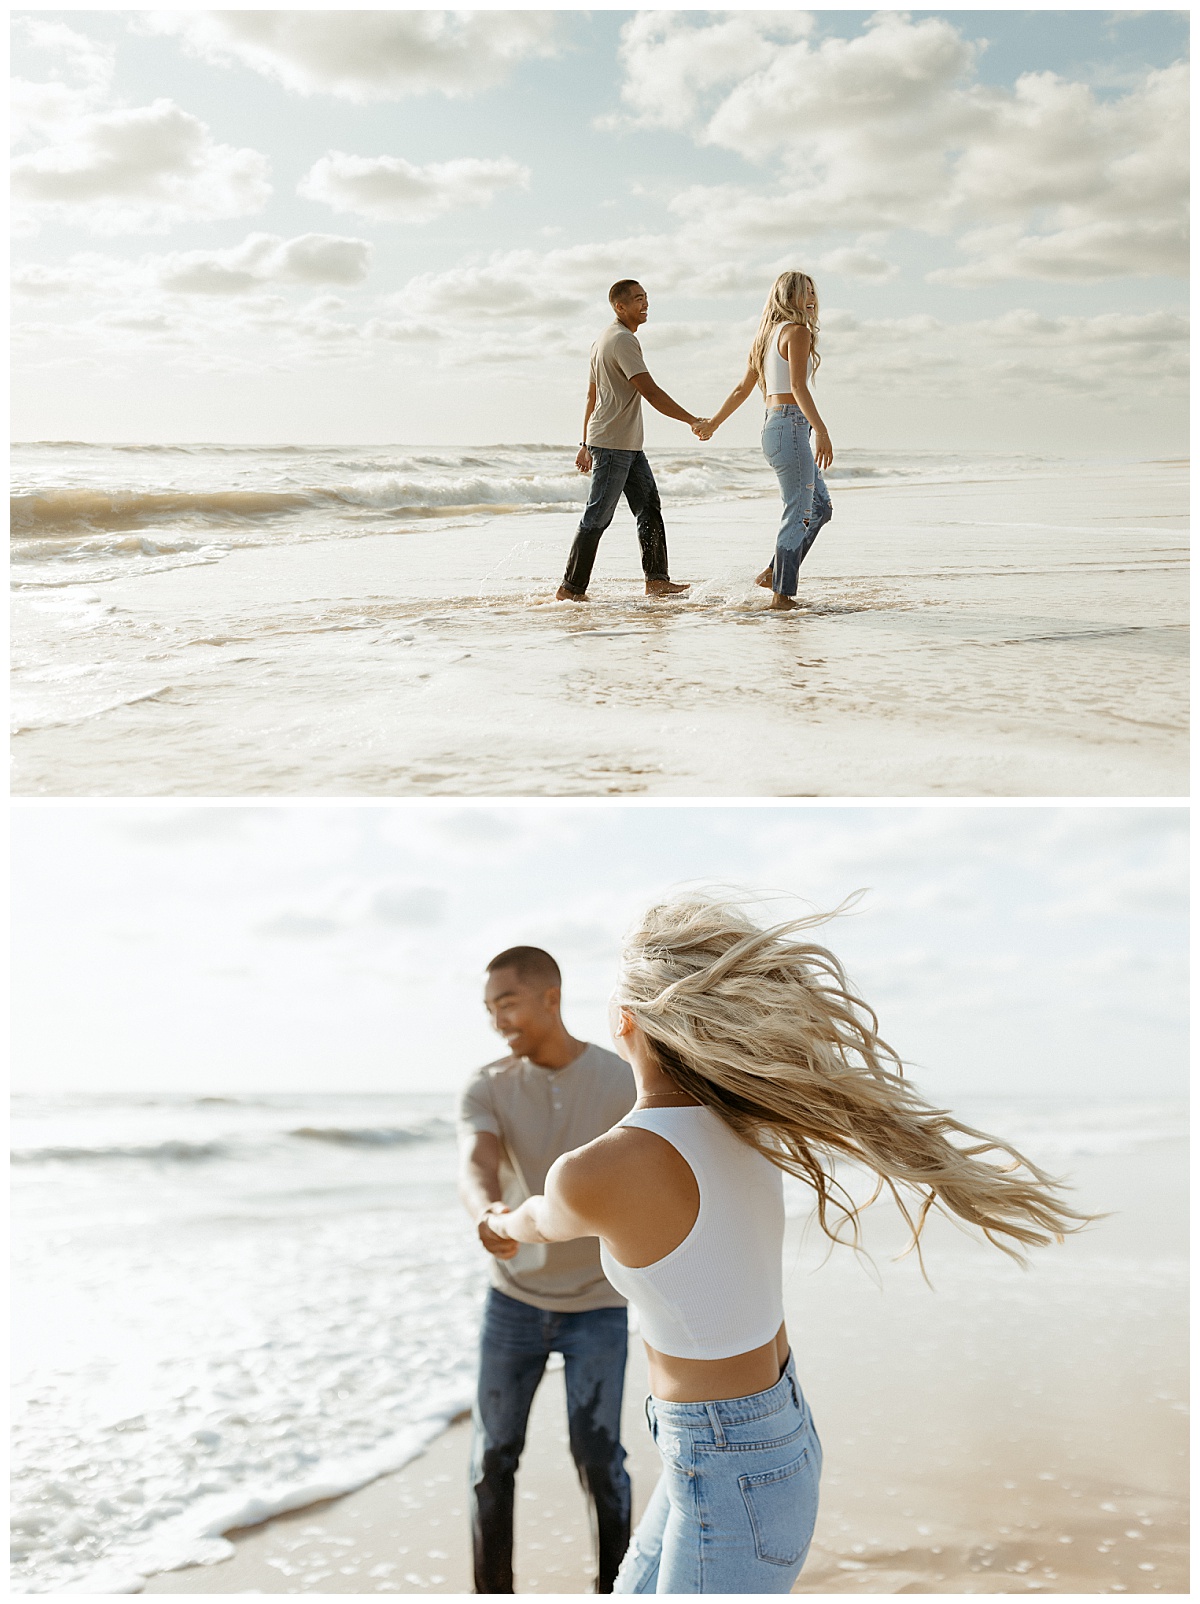 man spins woman around in waves by Nikki Meer Photography